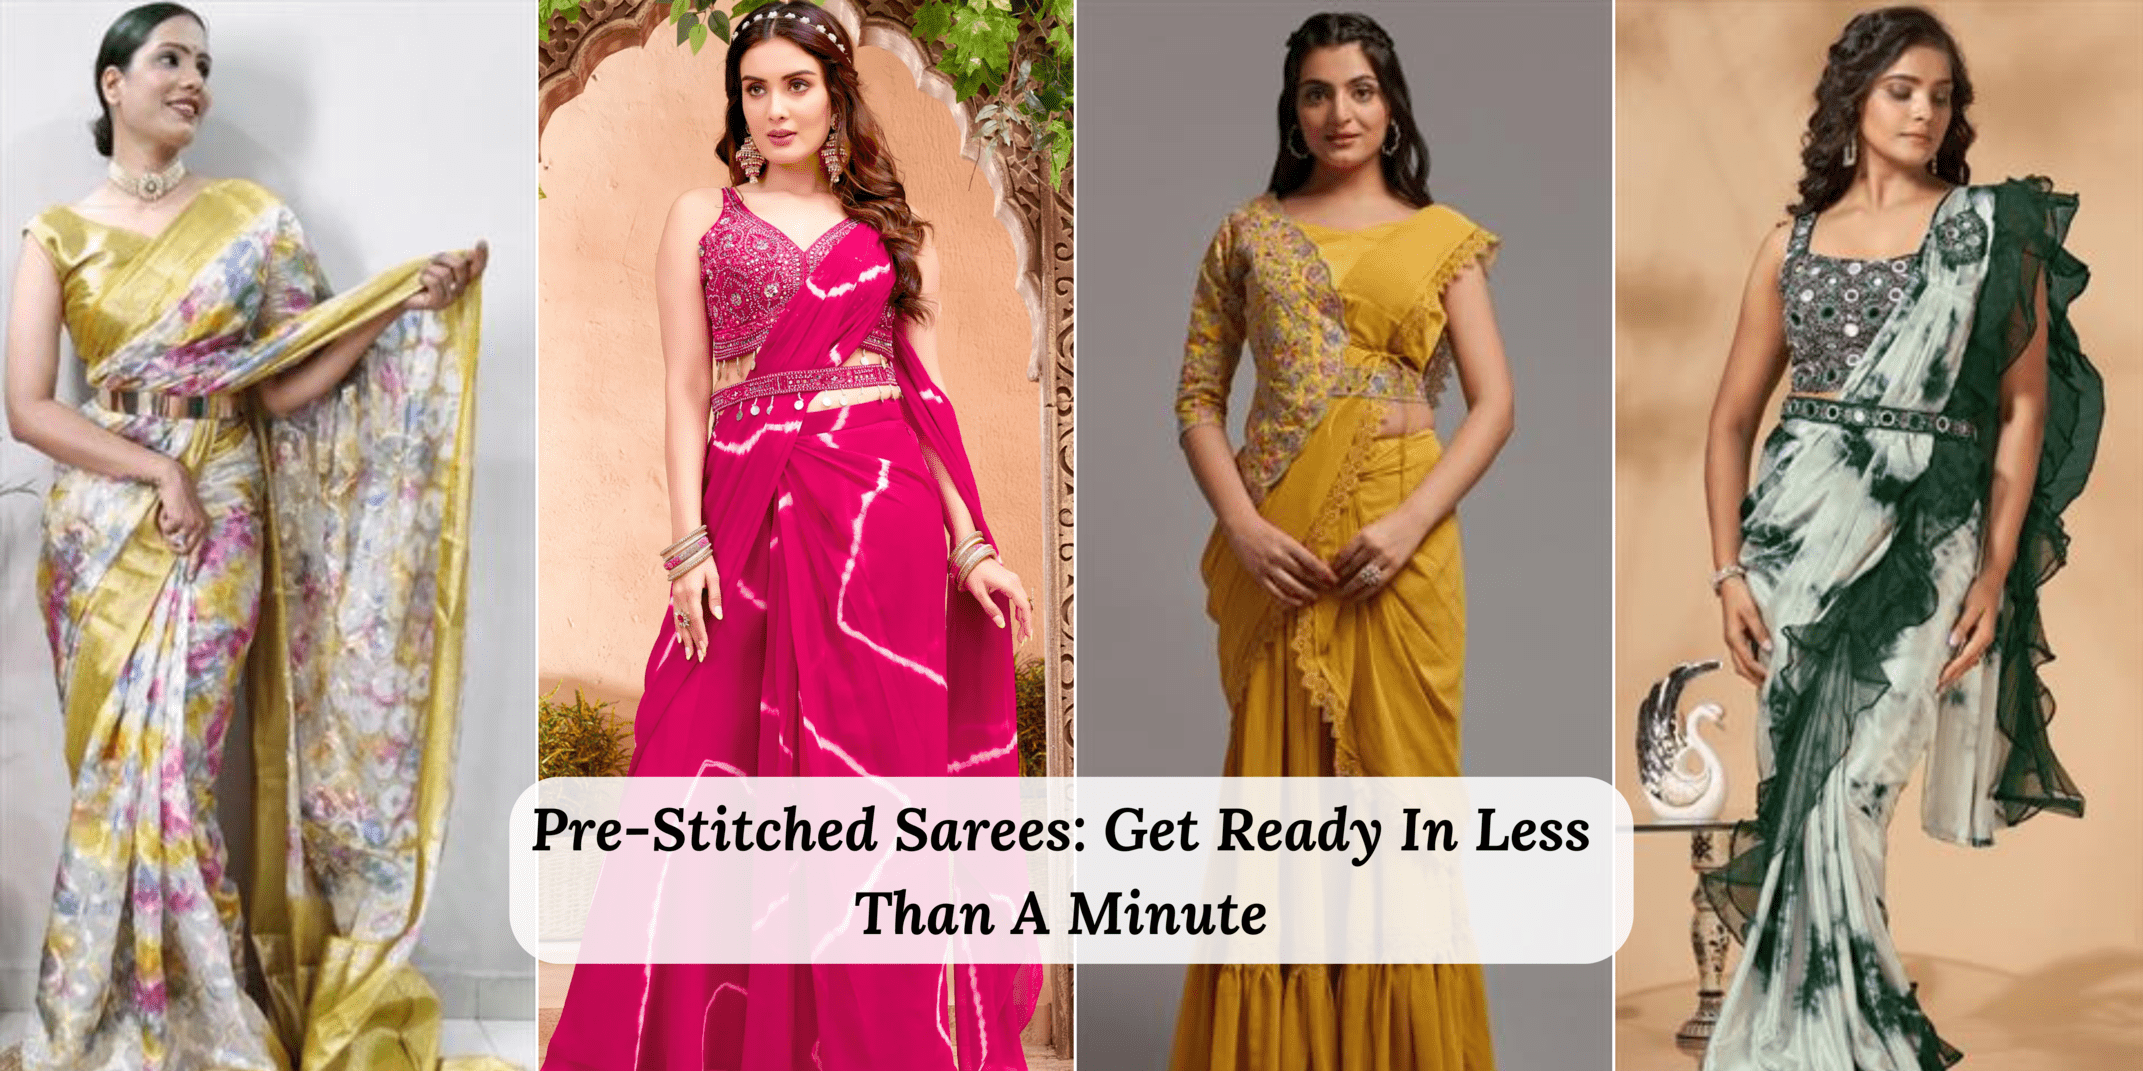 Pre-Stitched Sarees: Get Ready In Less Than A Minute